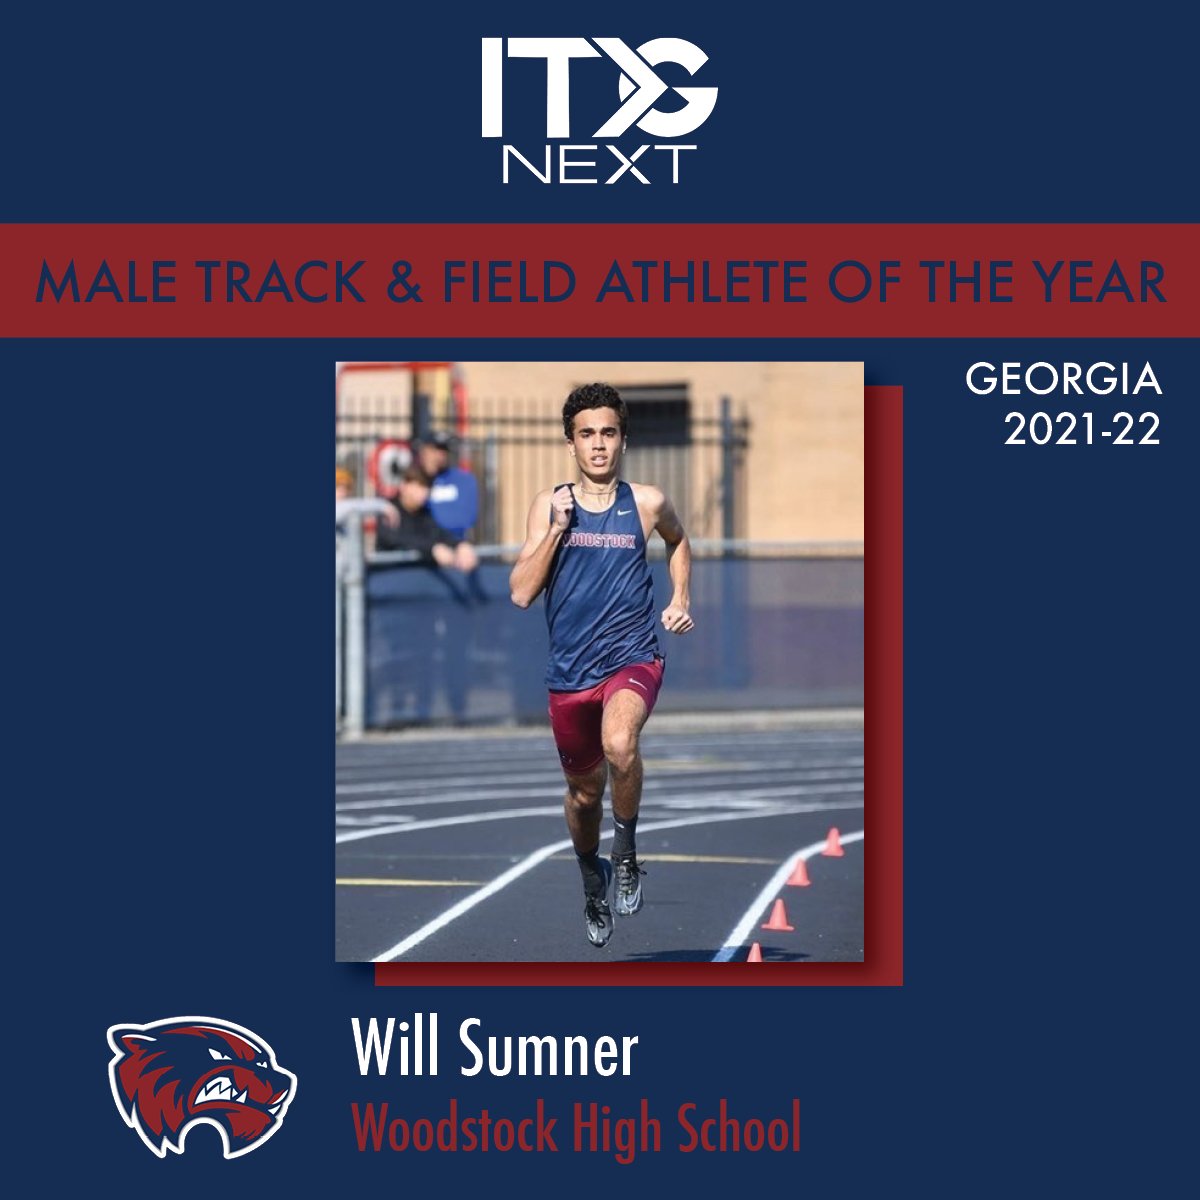 Congratulations to Will Sumner from @woodstock_xc for winning Male Track & Field Athlete of the Year! . . . . . #woodstockhs #highschool #sports #track #field #trackandfield #ghsa #athlete